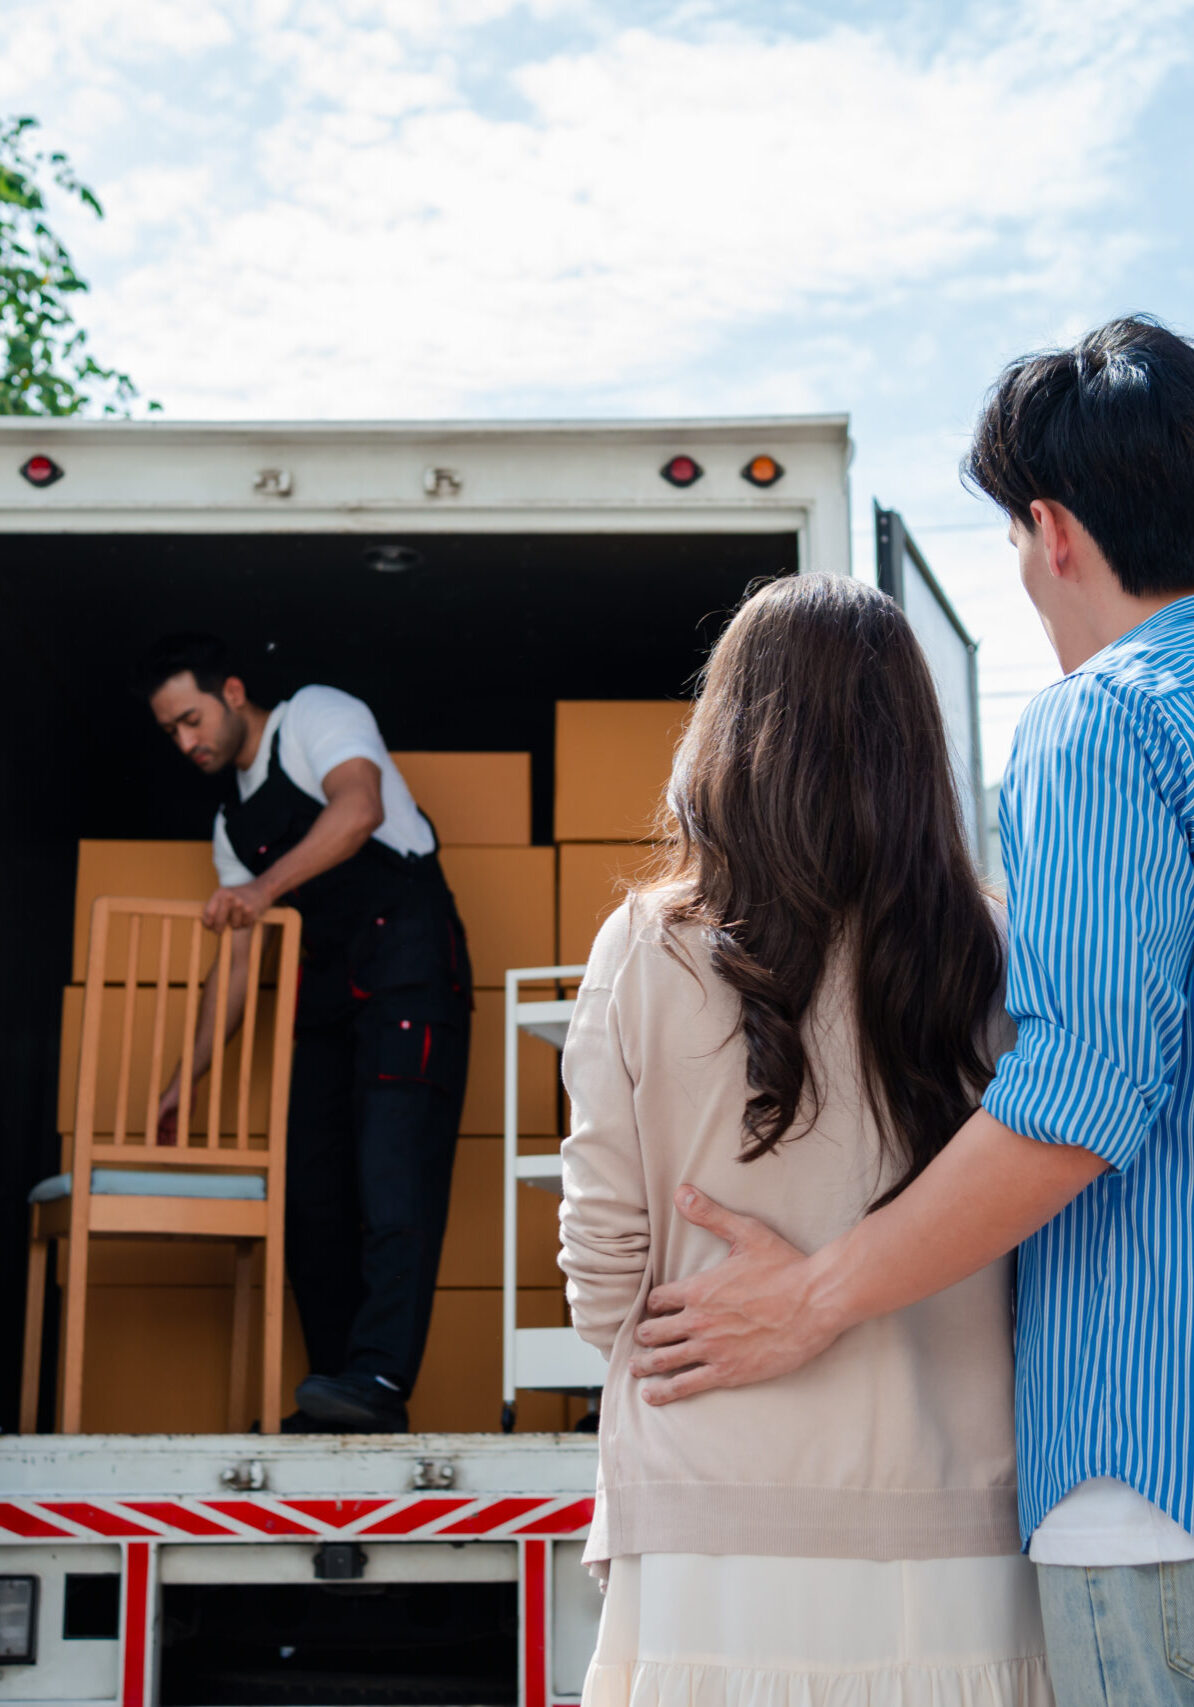 Asian Couple check while unloading boxes and furniture from a pickup truck to a new house with service cargo two men movers worker in uniform lifting boxes. concept of Home moving and delivery.